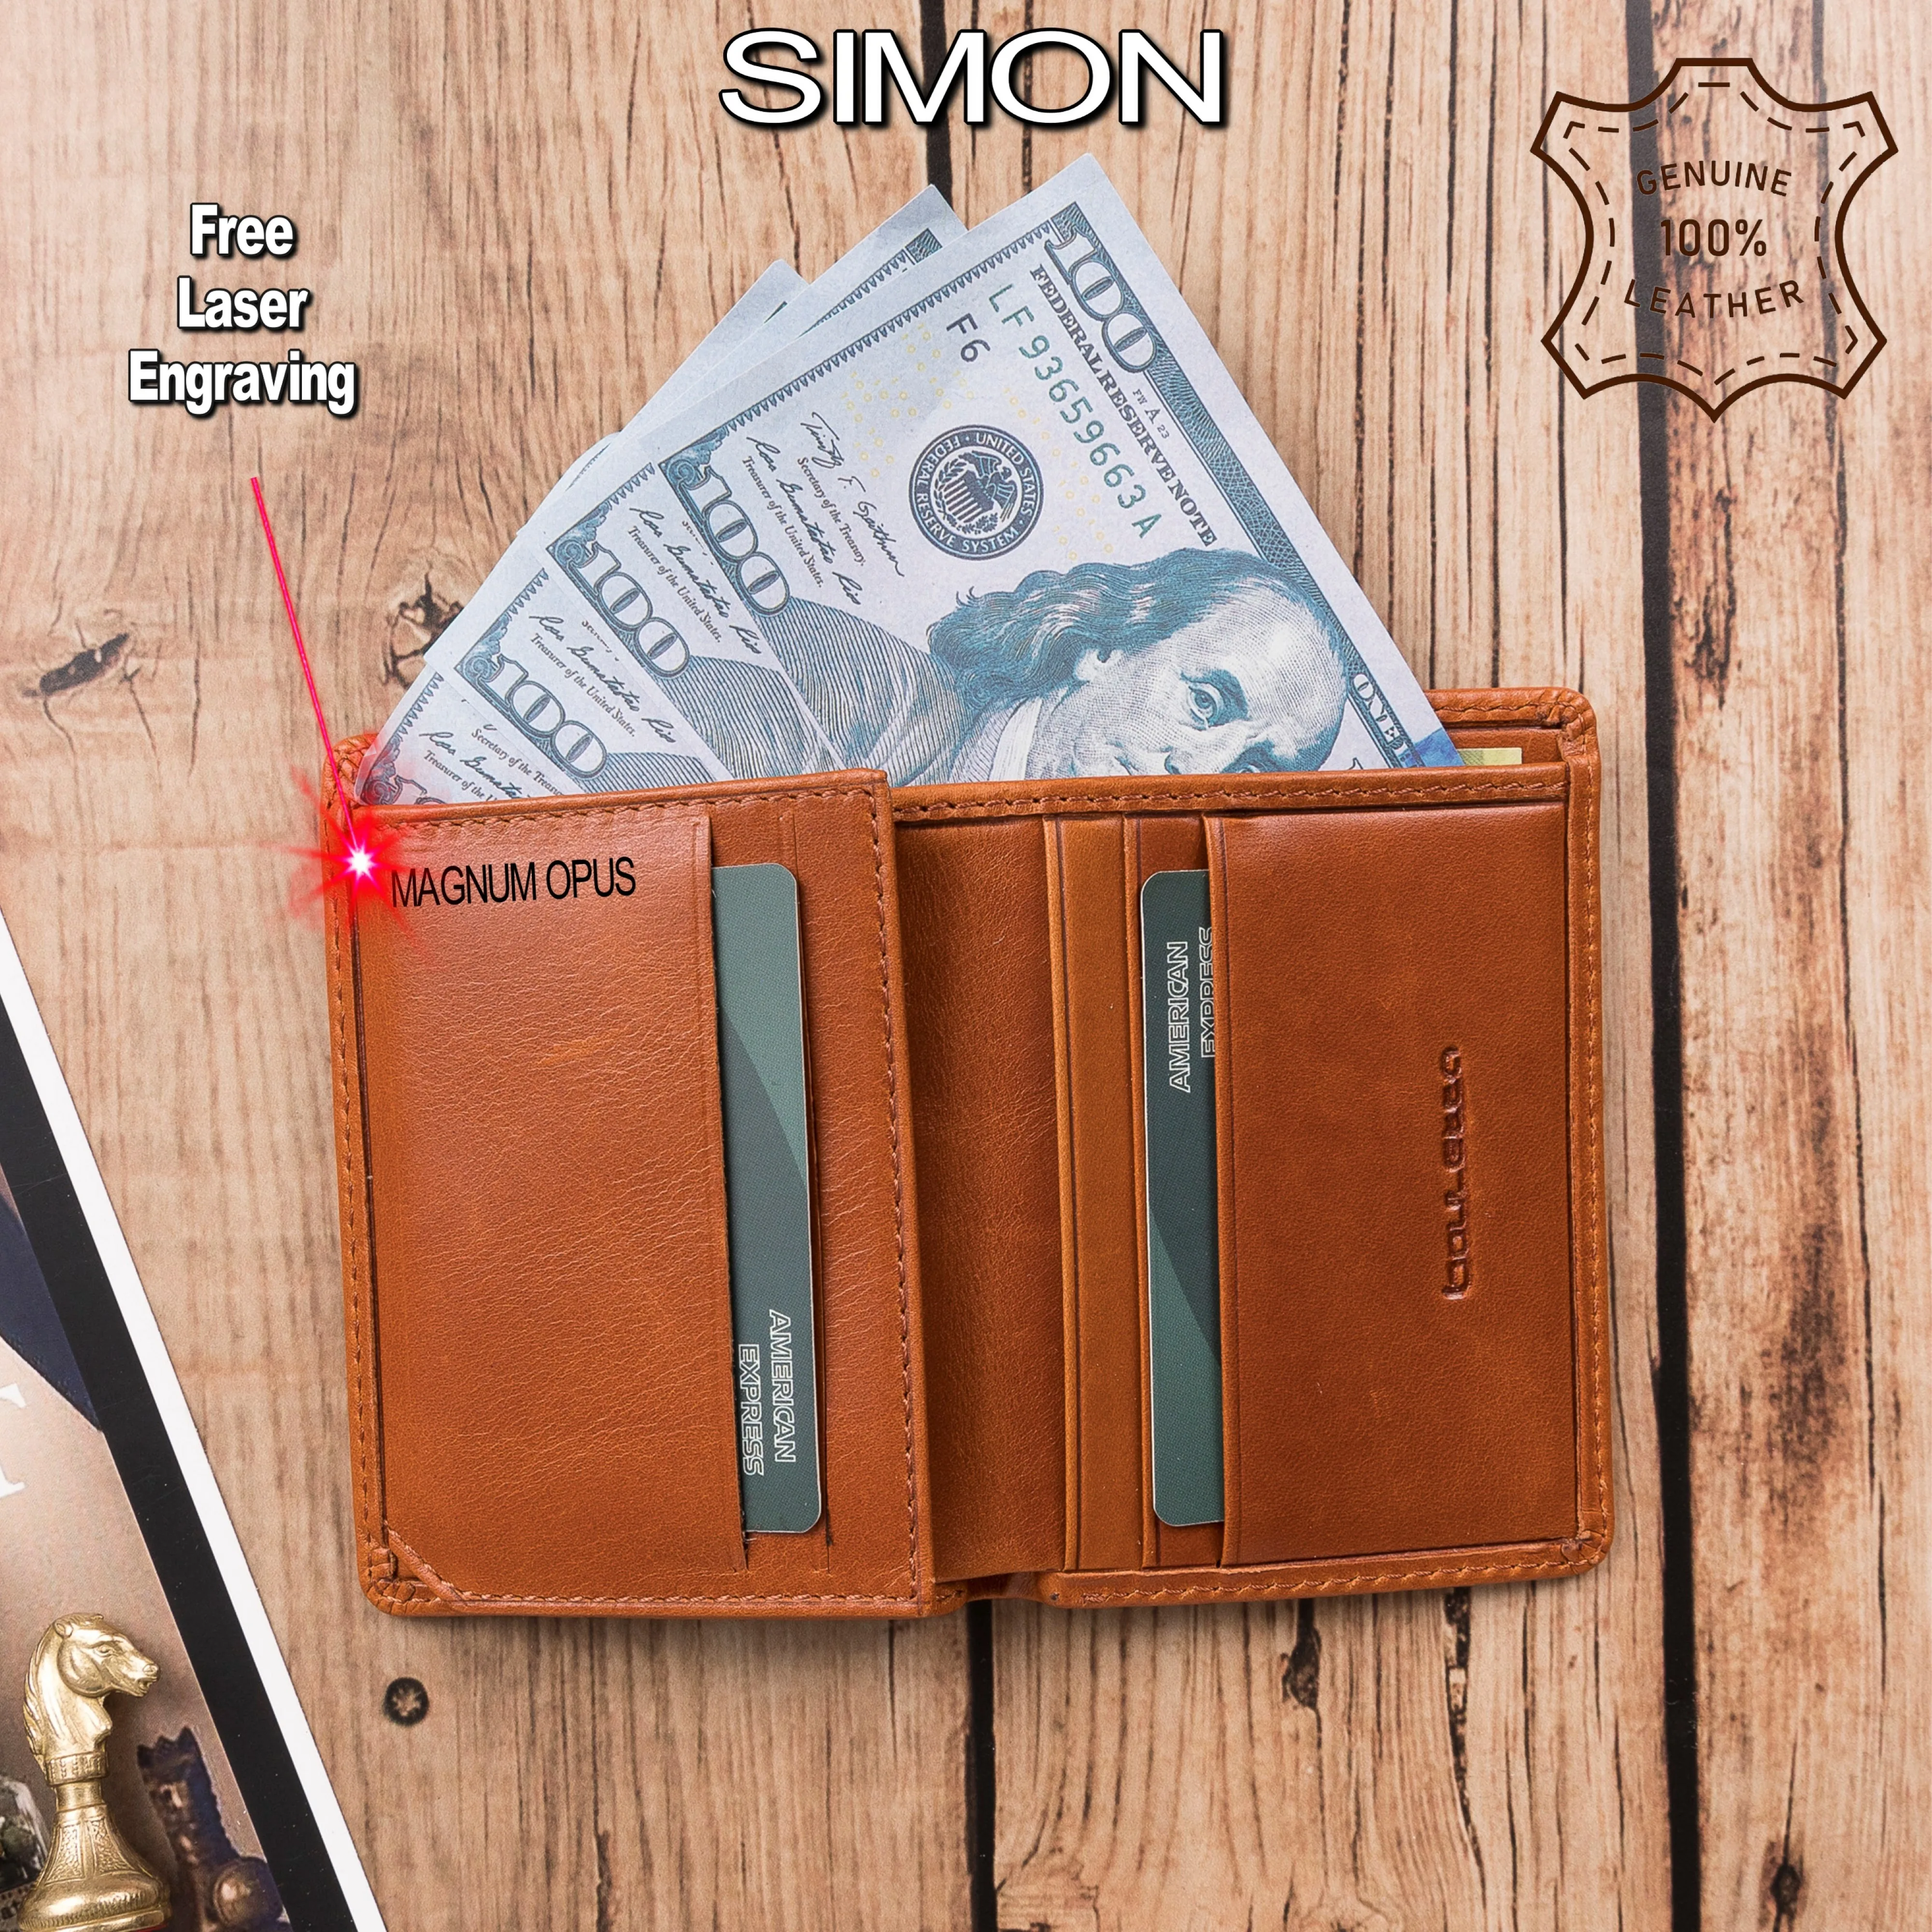 Handmade Genuine Leather Card Holder Wallet Book Type Closure that Holds up to 7 Cards and Paper Money High Quality Elegant